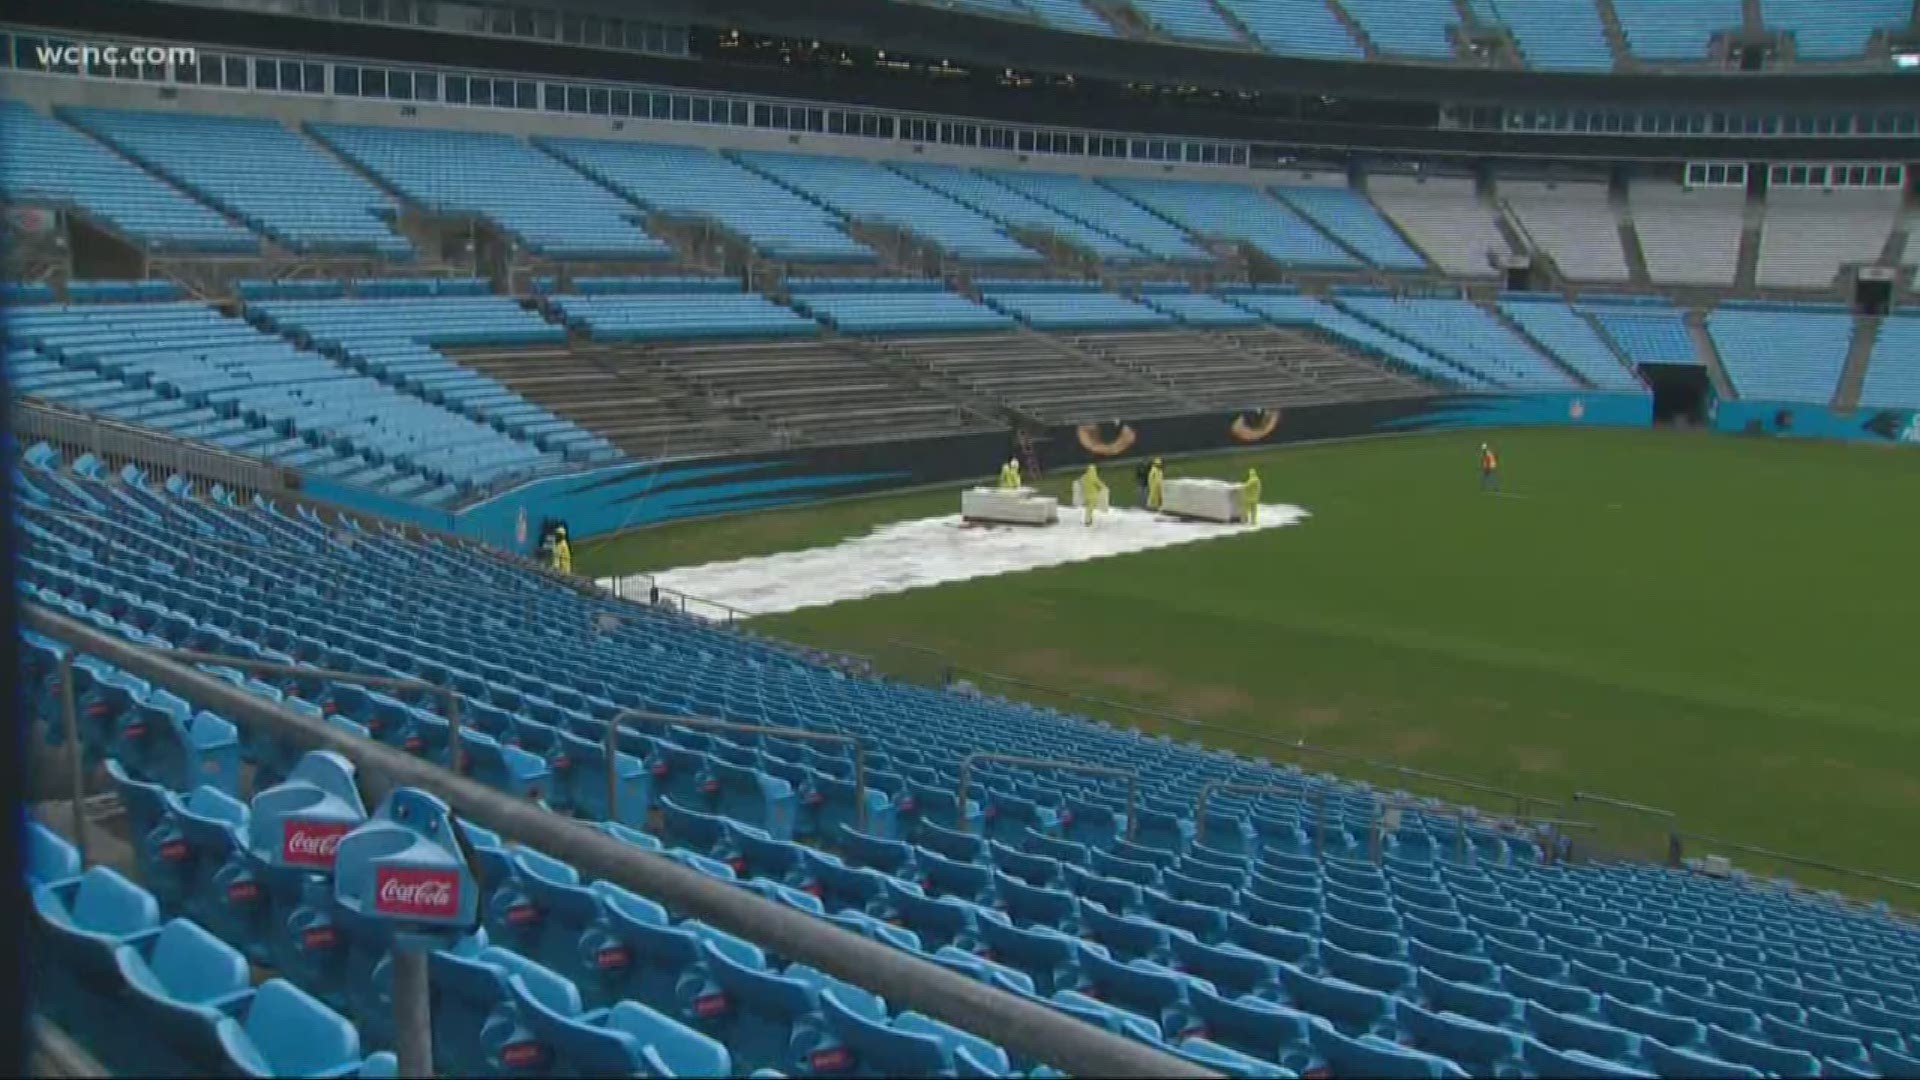 A little less than 900 seats will be removed to make room for field-level bunker suites in the west endzone at Bank of America Stadium.